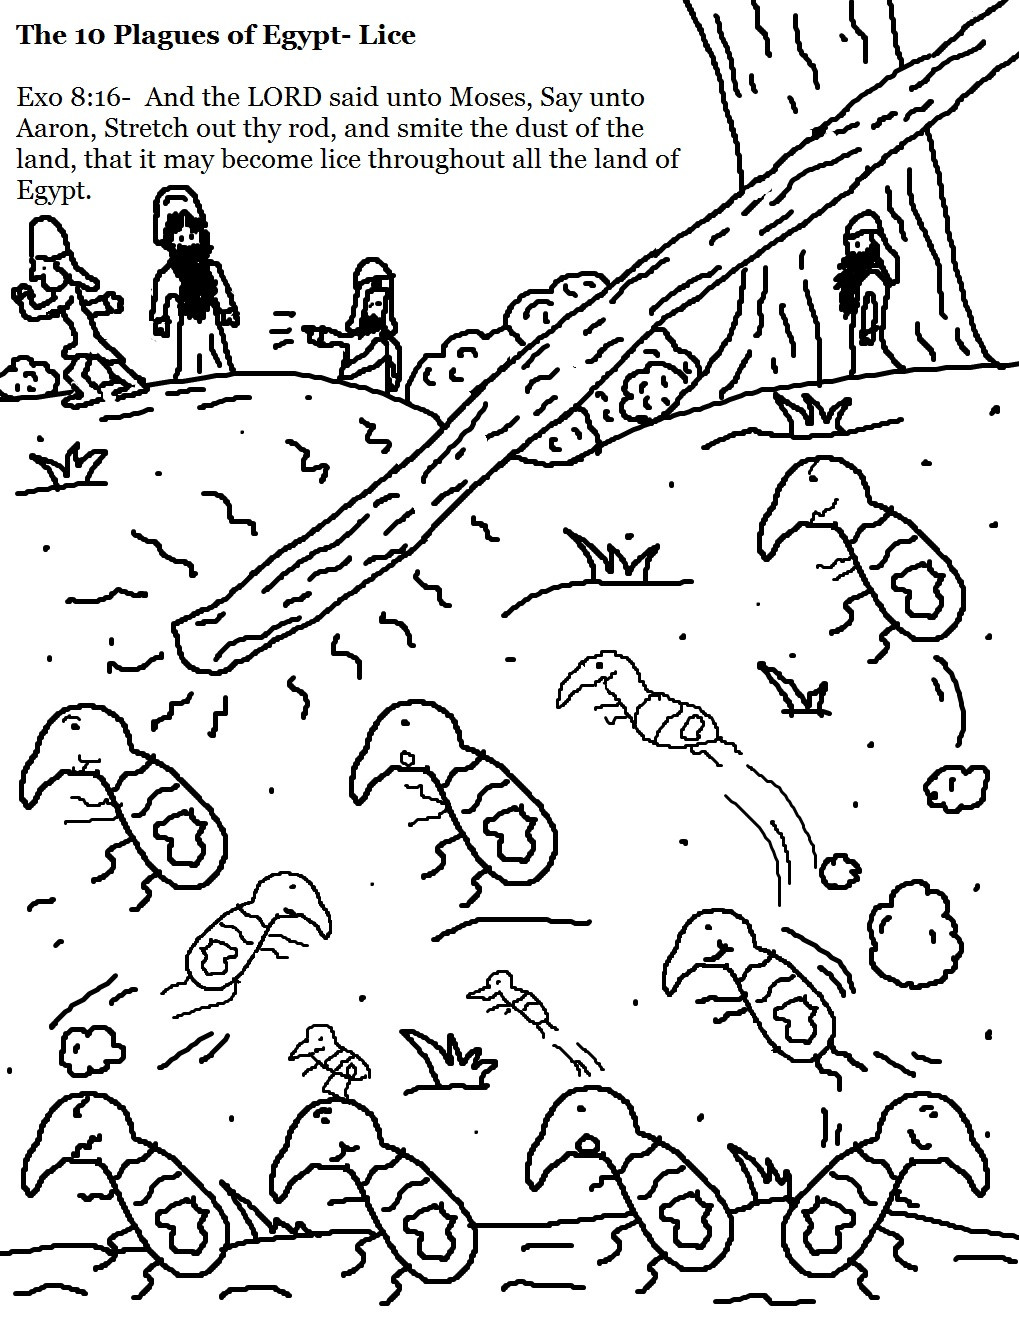 Free Printable Coloring Sheets For The 10 Plagues
 The 10 Plagues of Egypt Coloring Pages